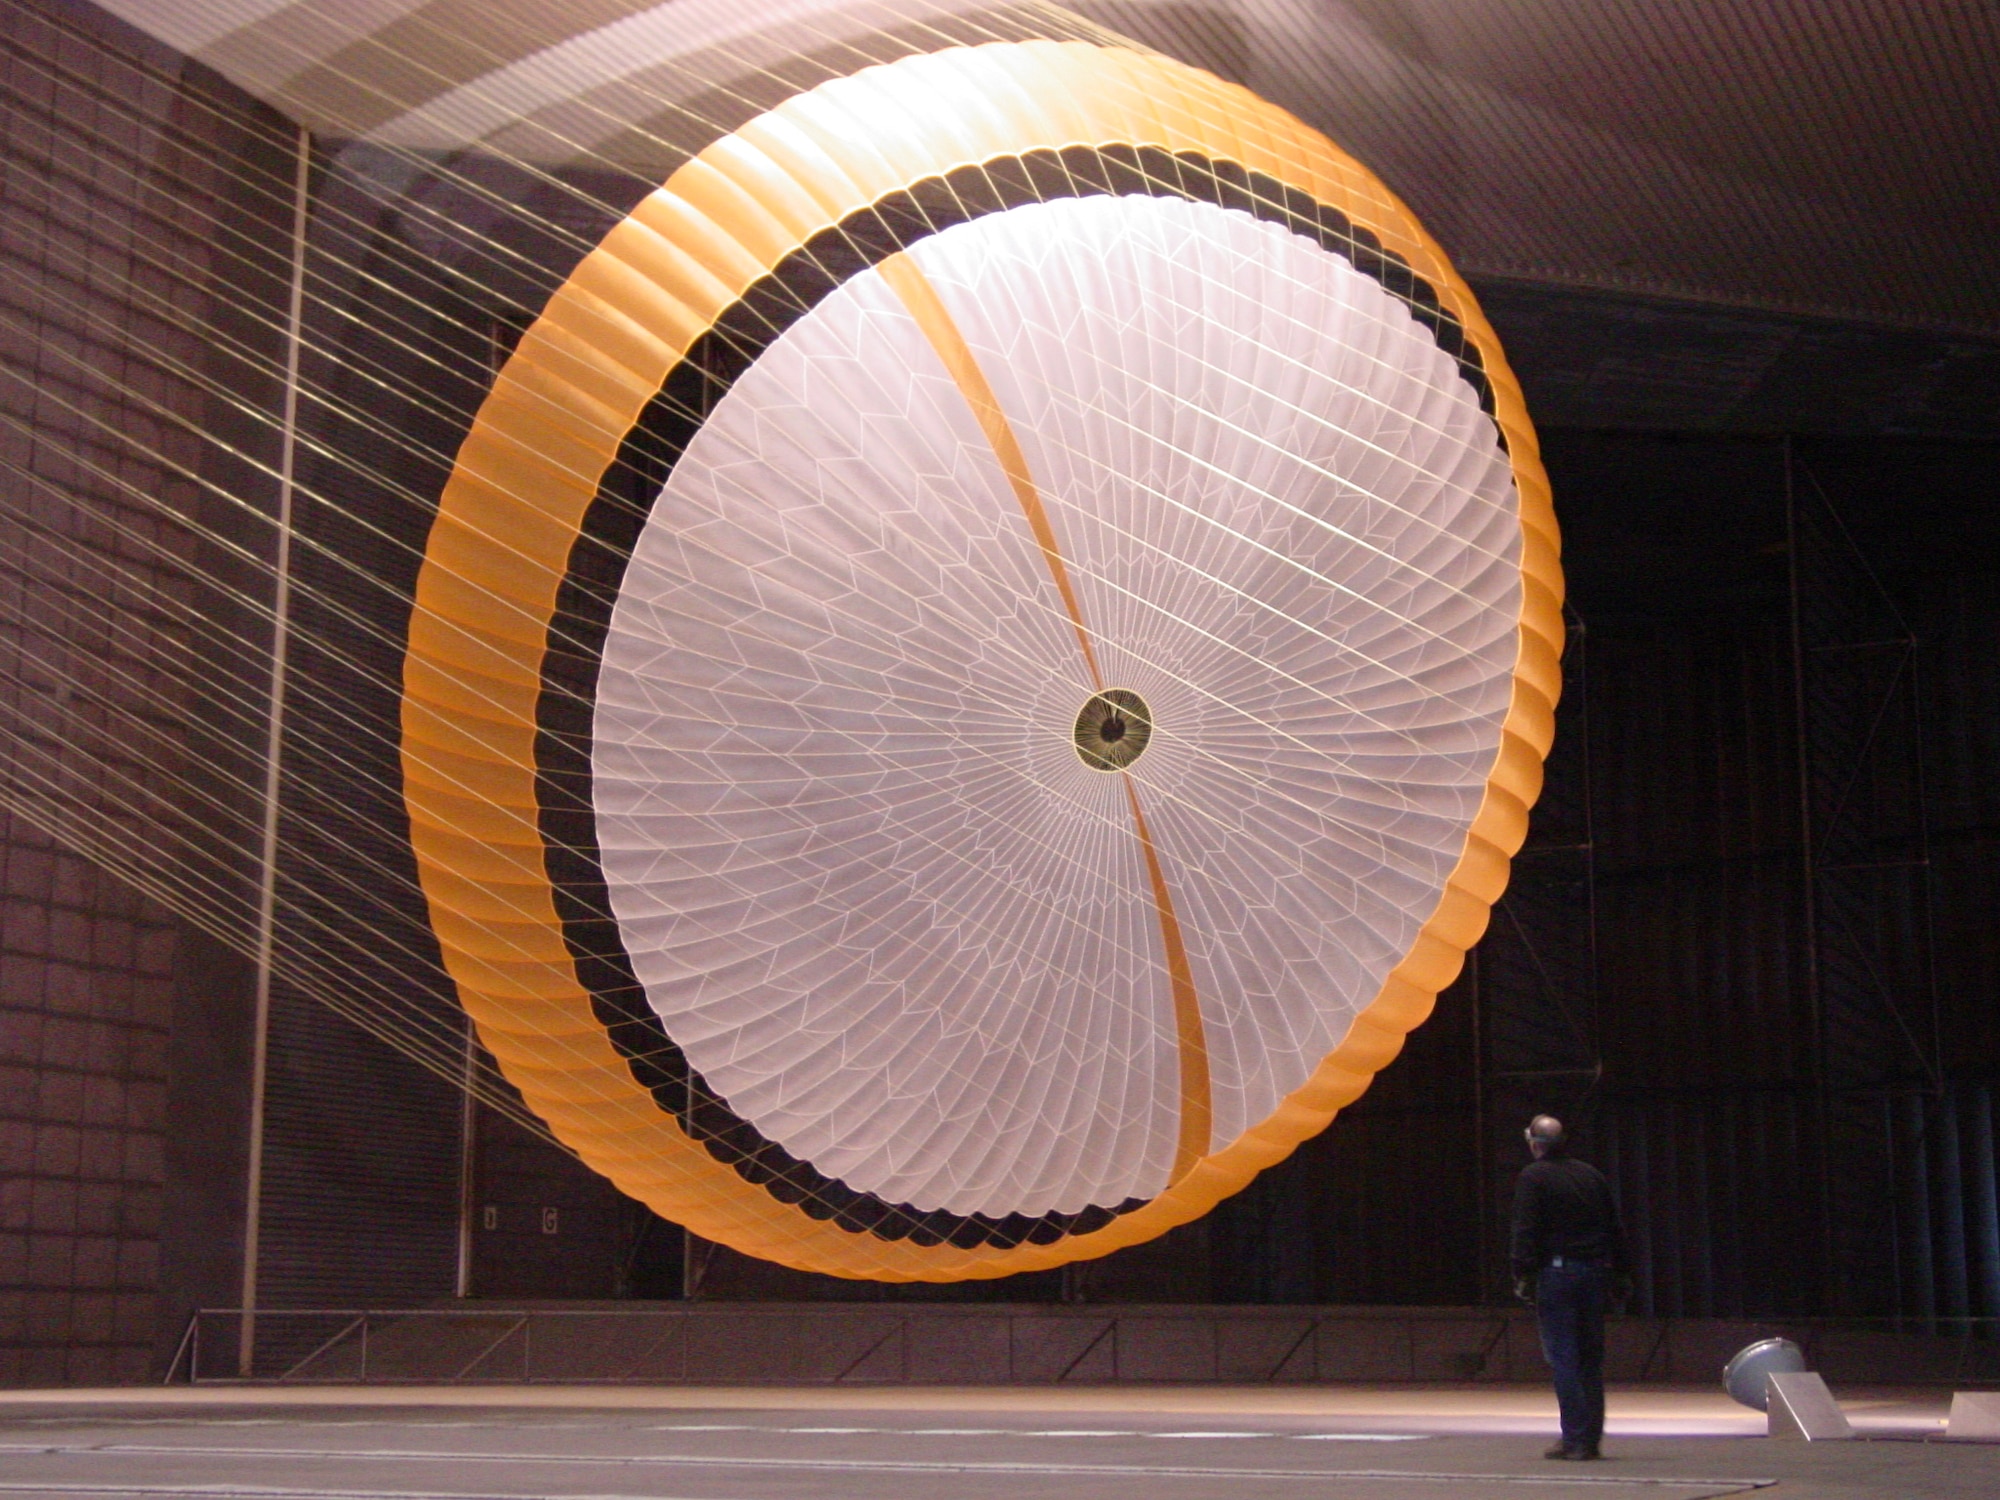 In this image, an engineer is dwarfed by NASA's Mars Science Laboratory's parachute, which holds more air than a 3,000-square-foot house and is designed to survive loads in excess of 36,000 kilograms (80,000 pounds). The parachute, built by Pioneer Aerospace, South Windsor, Conn., has 80 suspension lines, measures more than 65 feet in length, and opens to a diameter of nearly 55 feet. It is the largest disk-gap-band parachute ever built and is shown here inflated in the test section with only about 12.5 feet of clearance to both the floor and ceiling of the world’s largest wind tunnel at National Full-Scale Aerodynamics Complex. The parachute is attached to a launch arm mounted on a swivel-base that allows the test item to pitch and yaw under simulated conditions of subsonic entry into the Martian atmosphere. (Photo courtesy of NASA/JPL and Pioneer Aerospace Corp.)